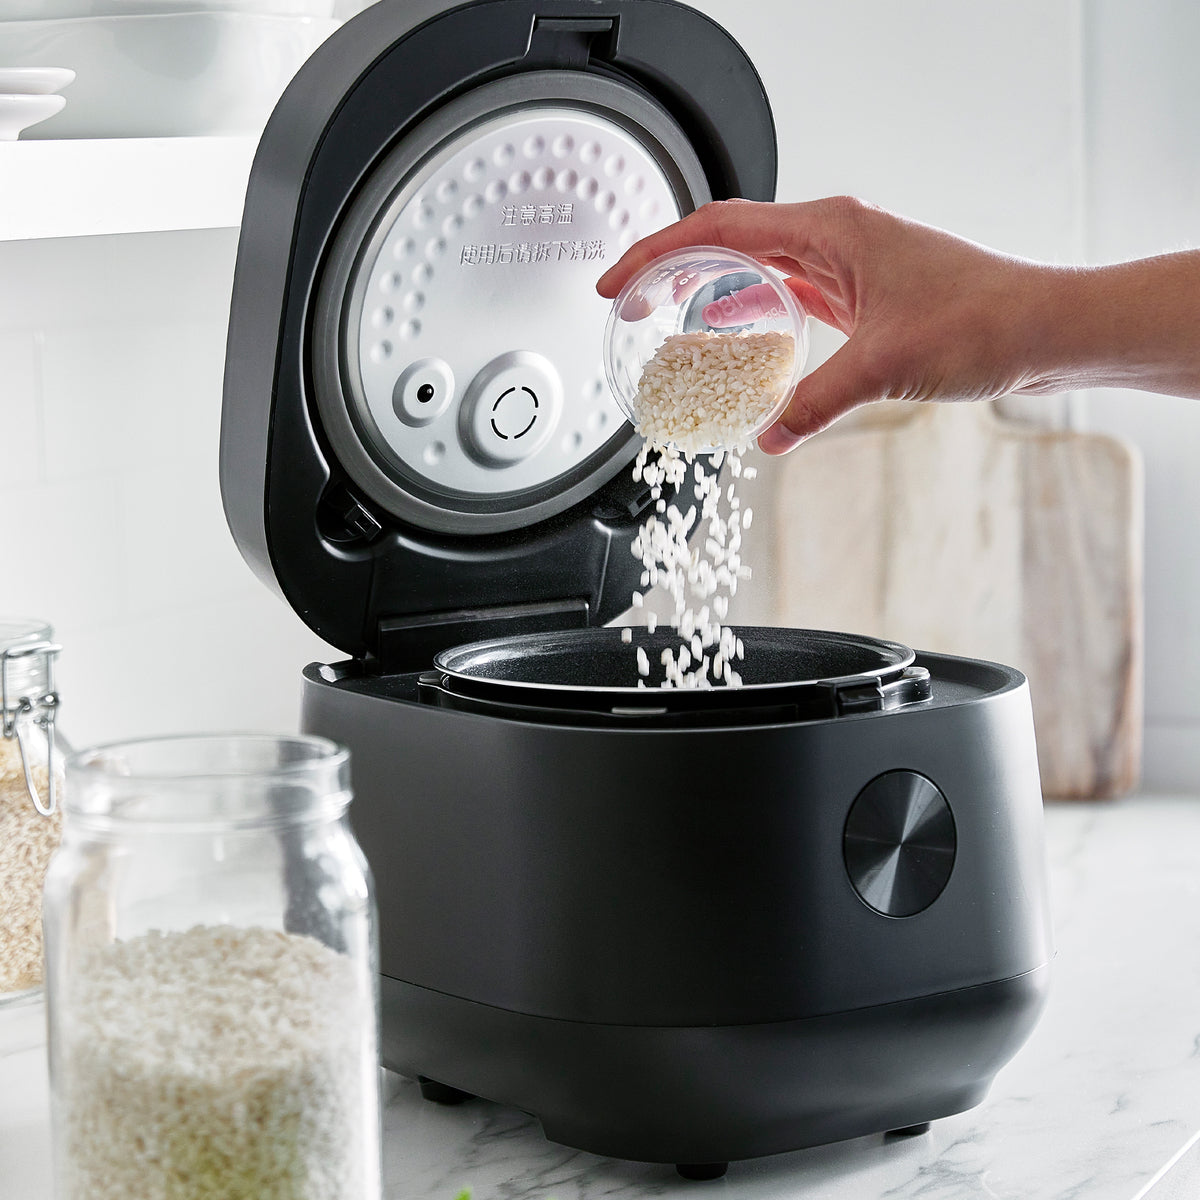 3 Cup Rice Cooker Review - BLACK + DECKER Small Rice Cooker 